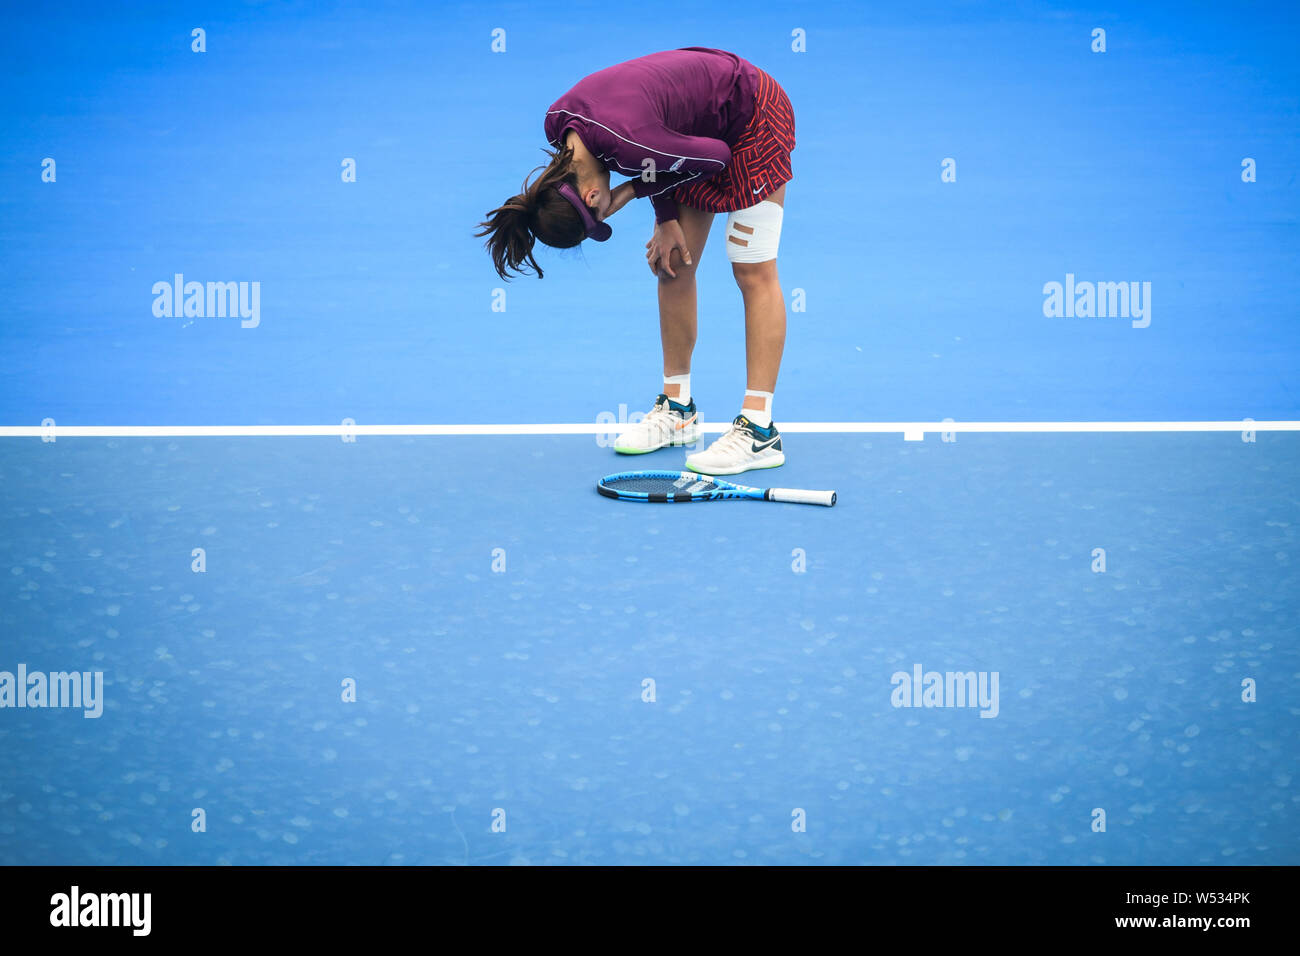 Wang Xinyu of China falls down while competing against Maria Sharapova of Russia in their second round match of the women's singles during the 2019 WT Stock Photo